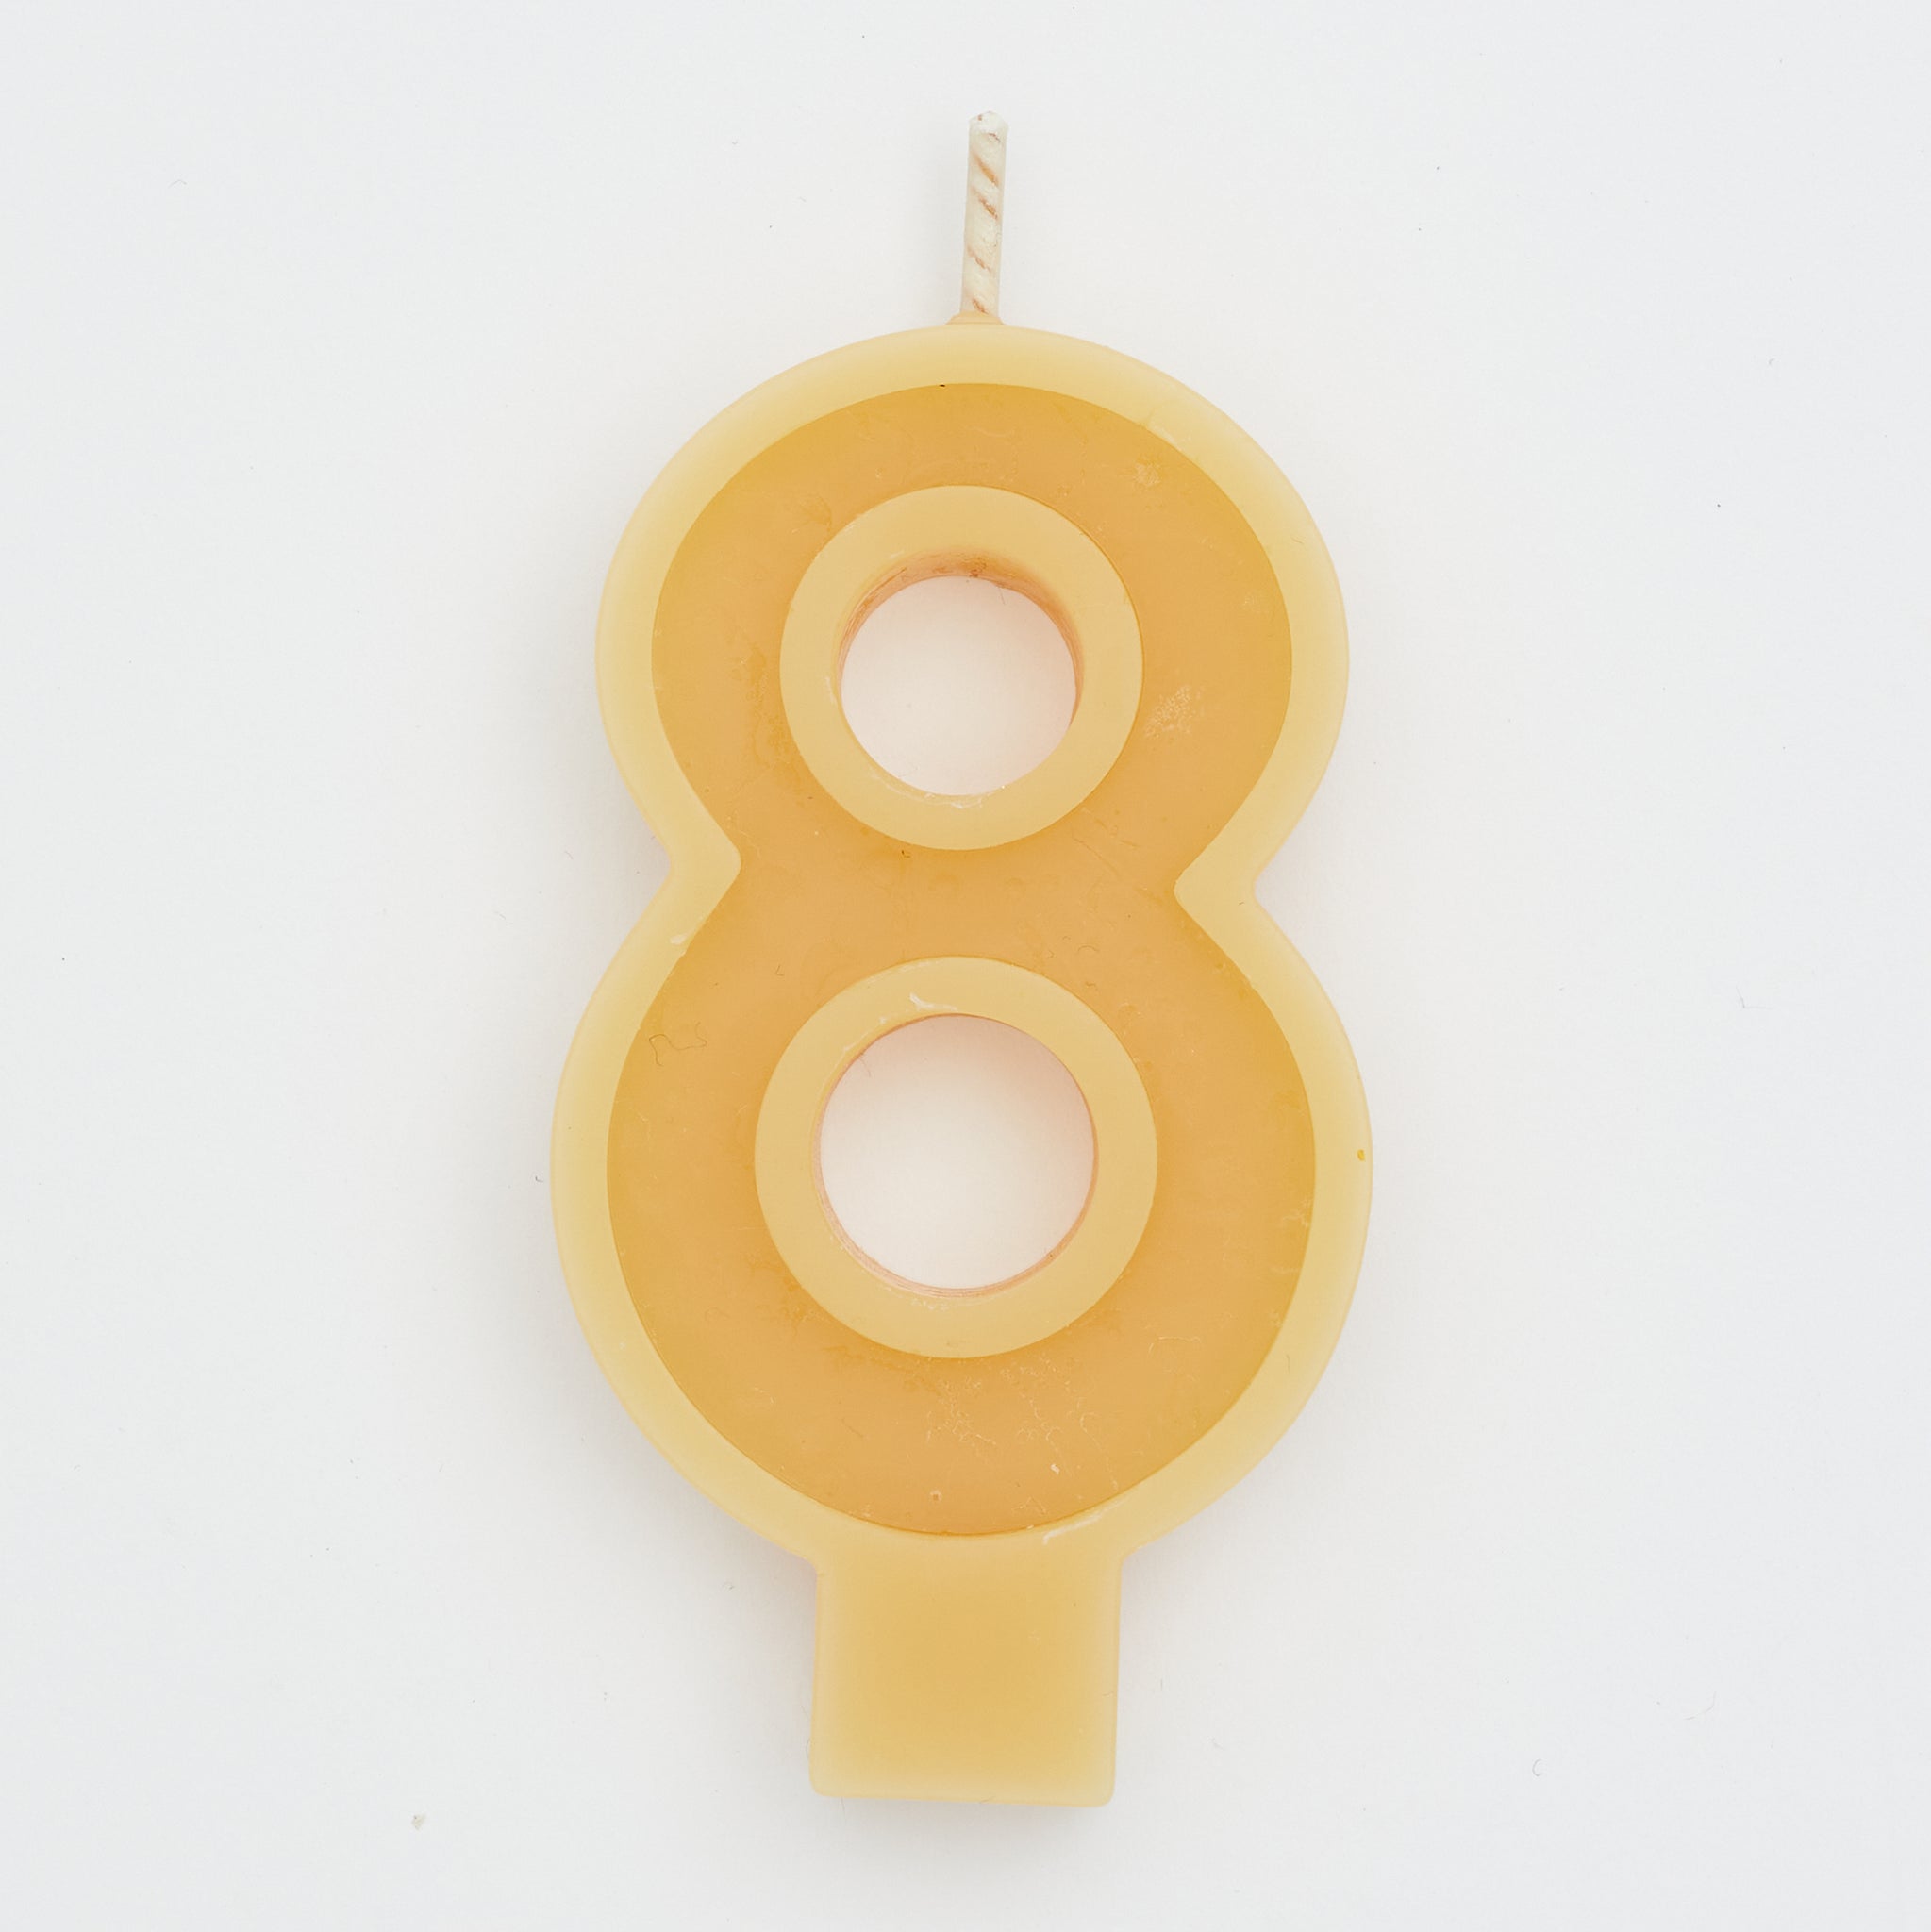 Blake & Mason Beeswax Celebration Number 8 Candles | made in Australia